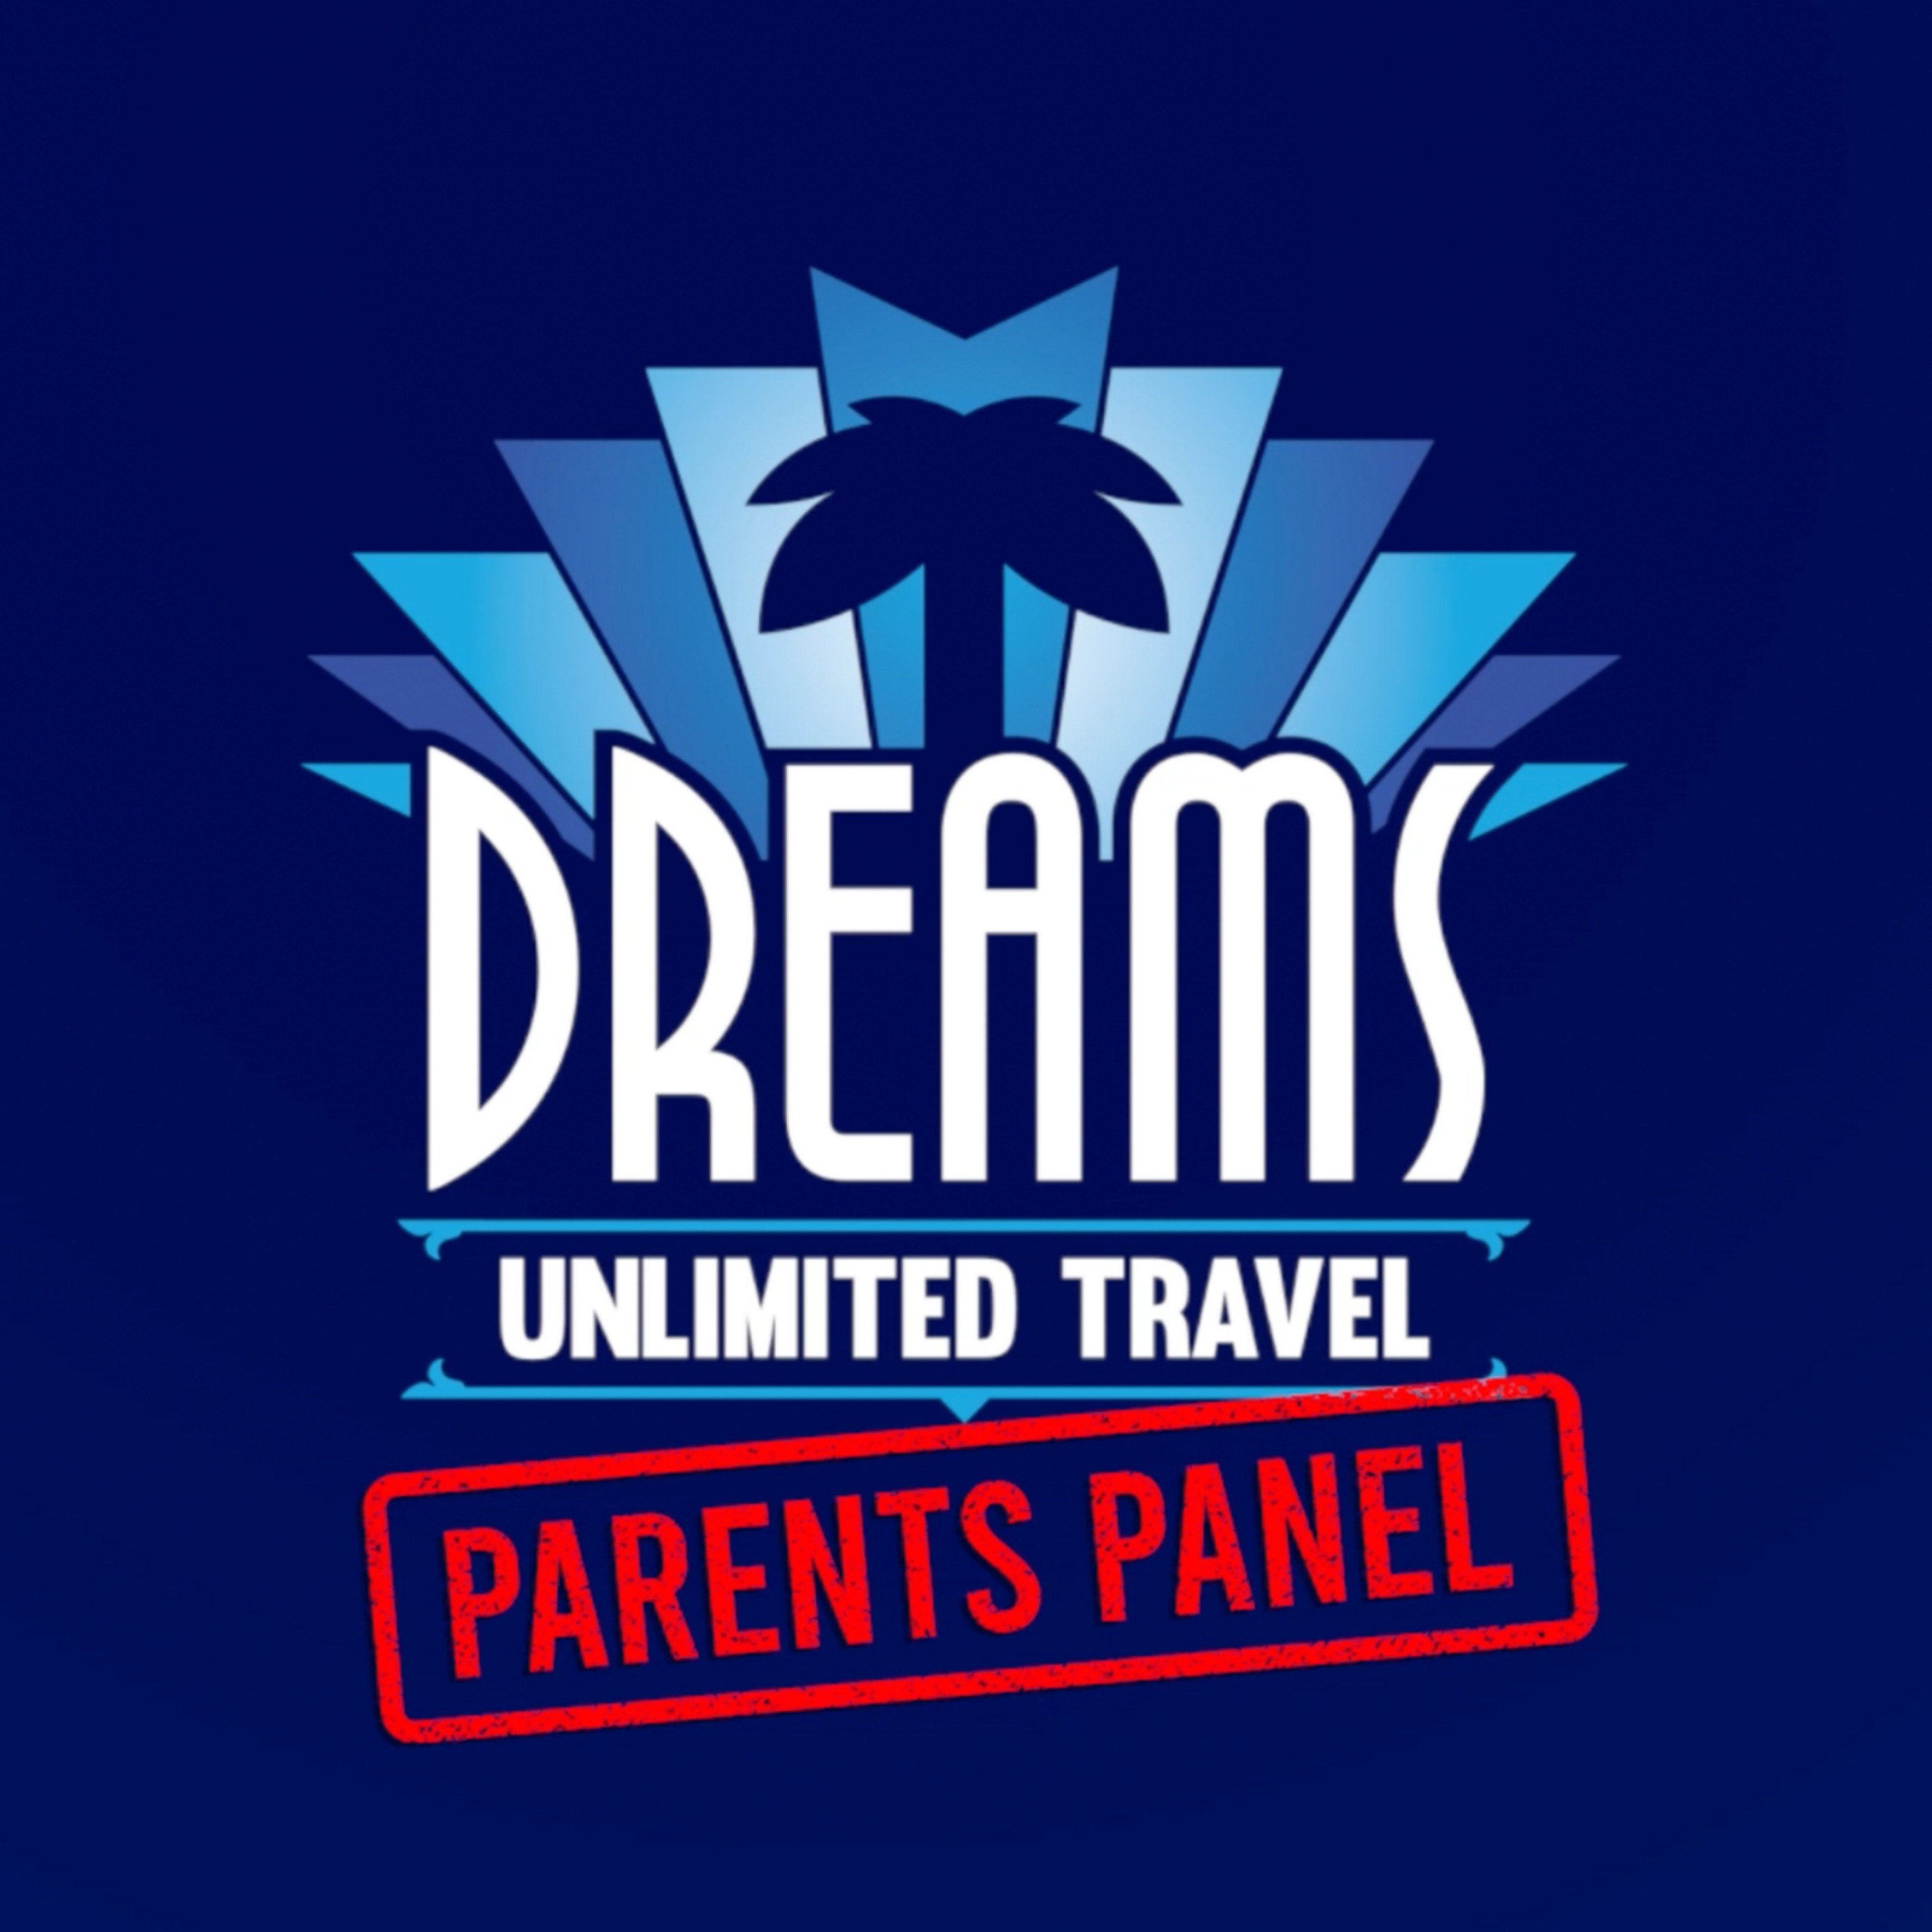 Visiting Walt Disney World with Your Teenagers | Parents Panel